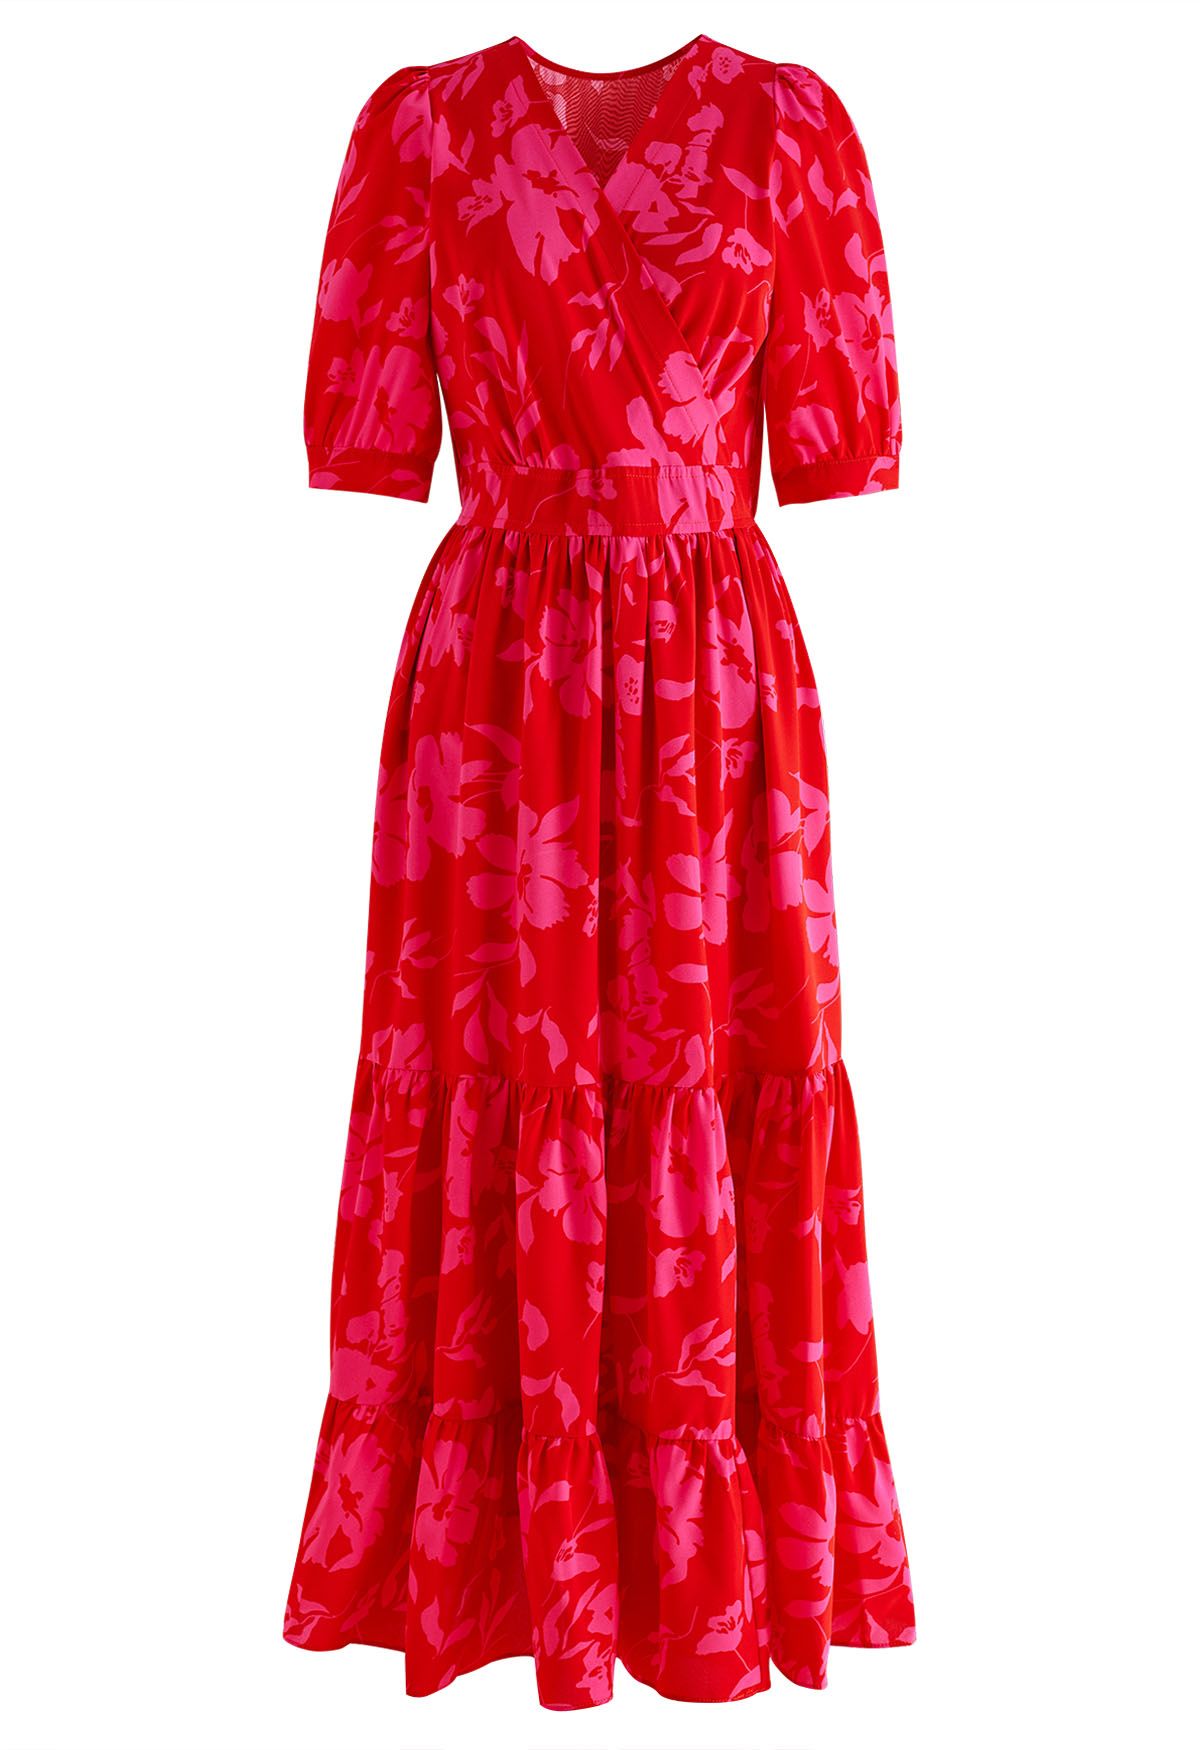 Red Floral Frilling Wrapped Dress - Retro, Indie and Unique Fashion